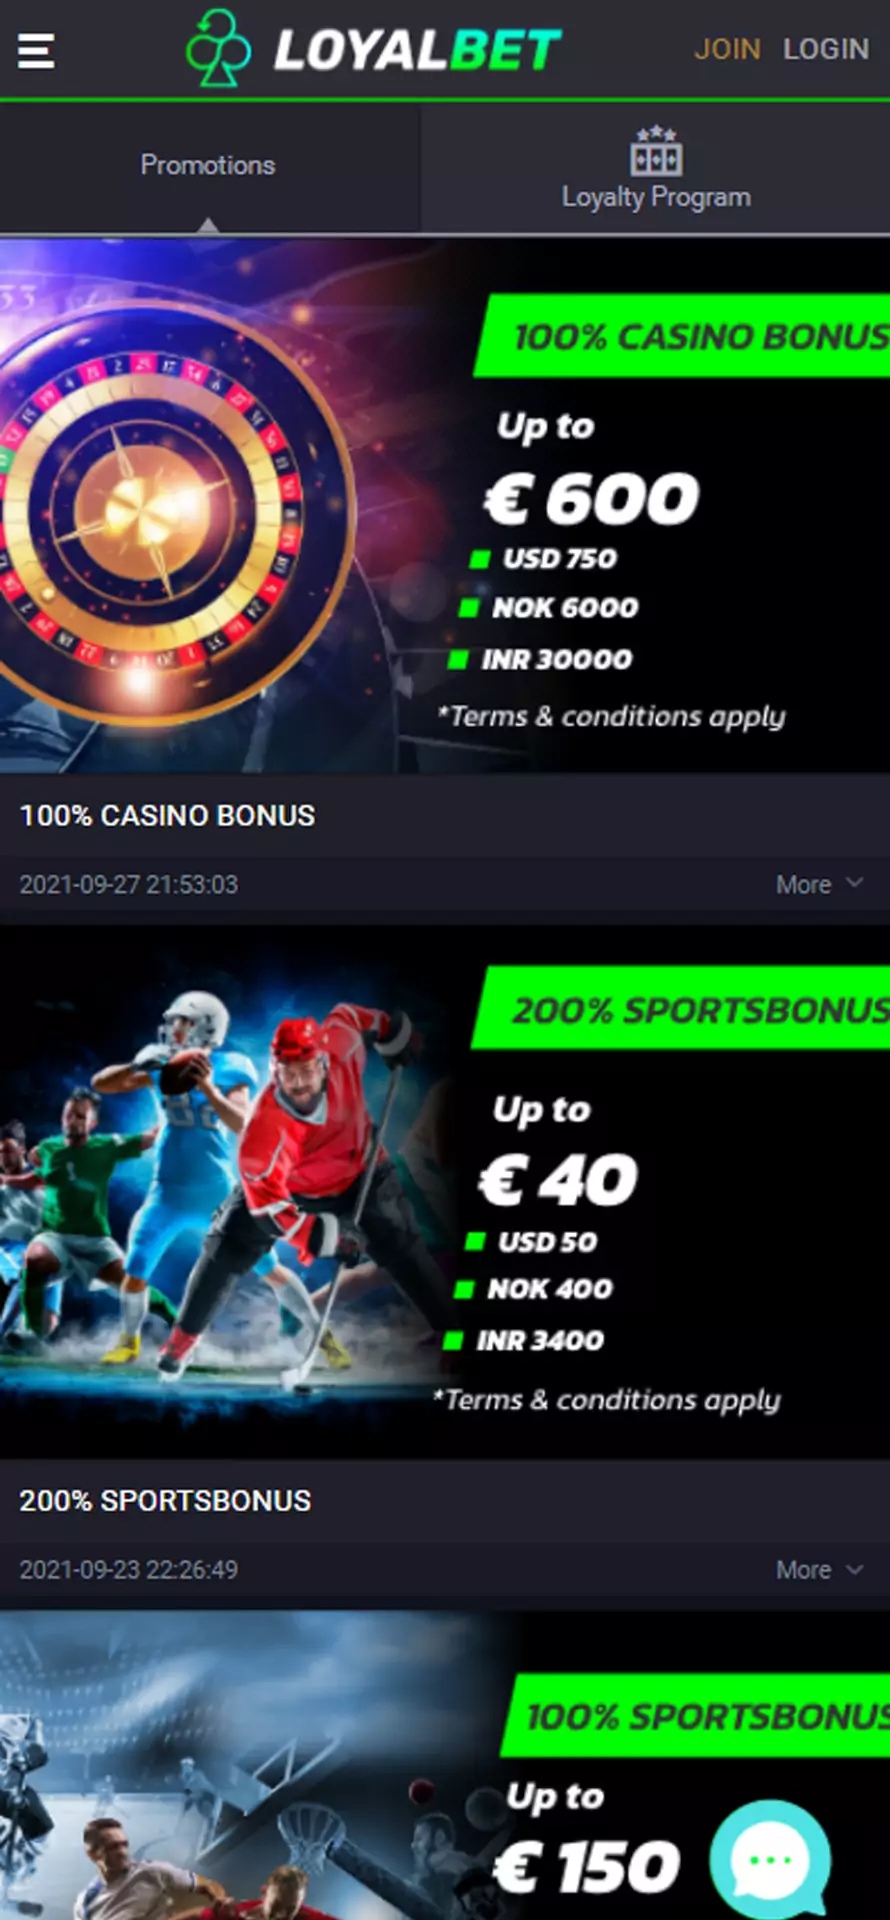 Use all of the Loyalbet promotions.